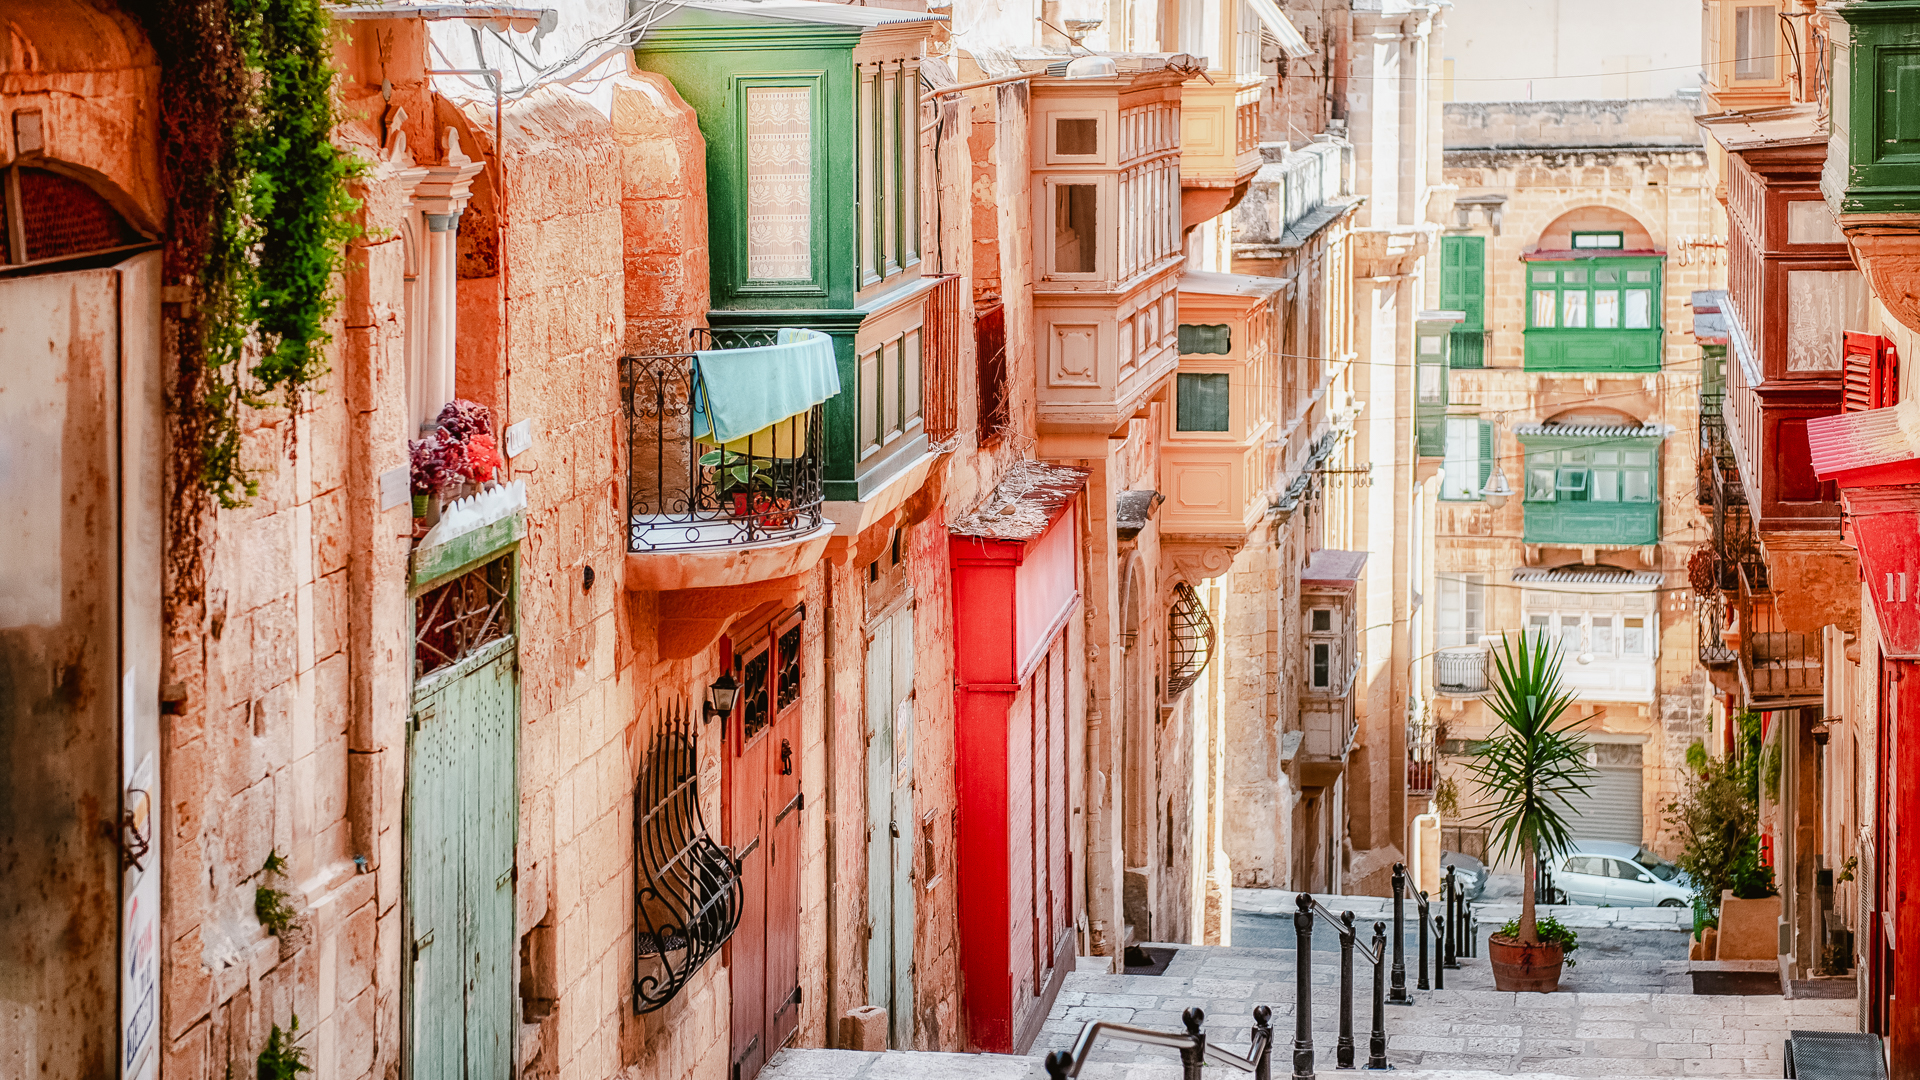 Narrow street in Valletta - the capital of Malta - with colorful doors stacked up all the way down.